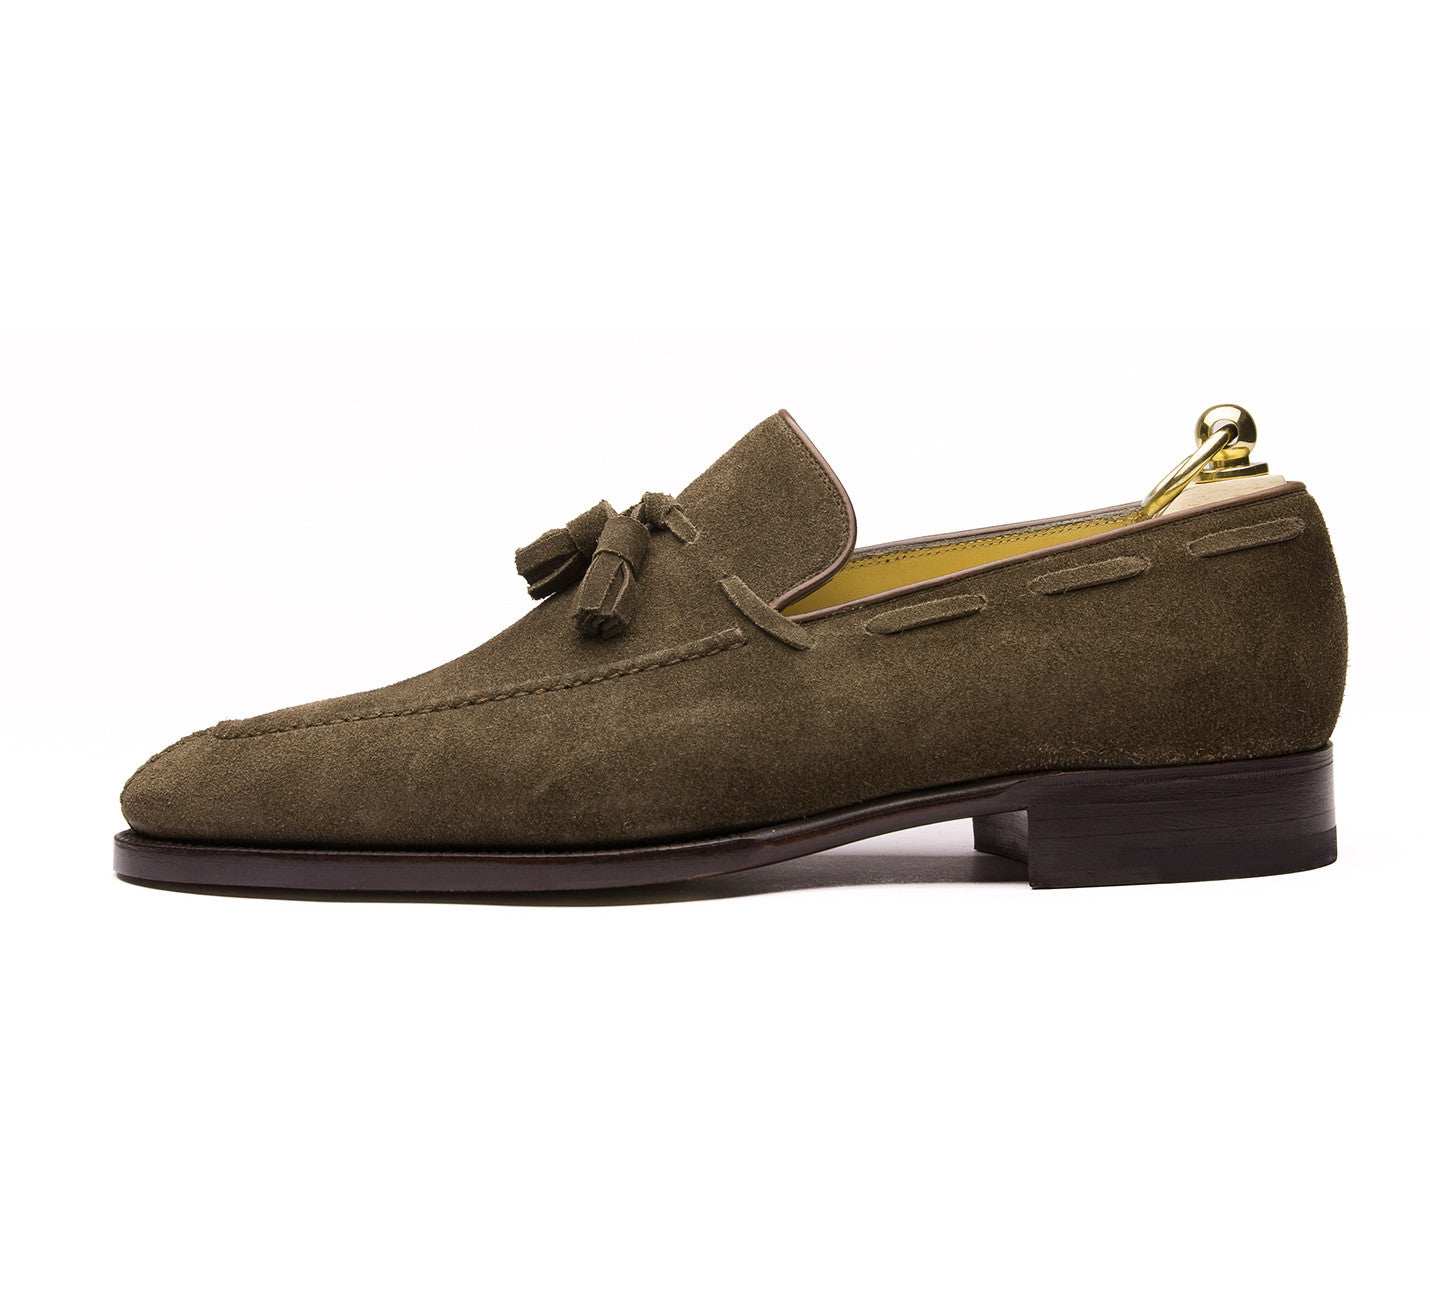 Stefano Bemer Style 1210 Loafer - Olive Bal Suede - Side View